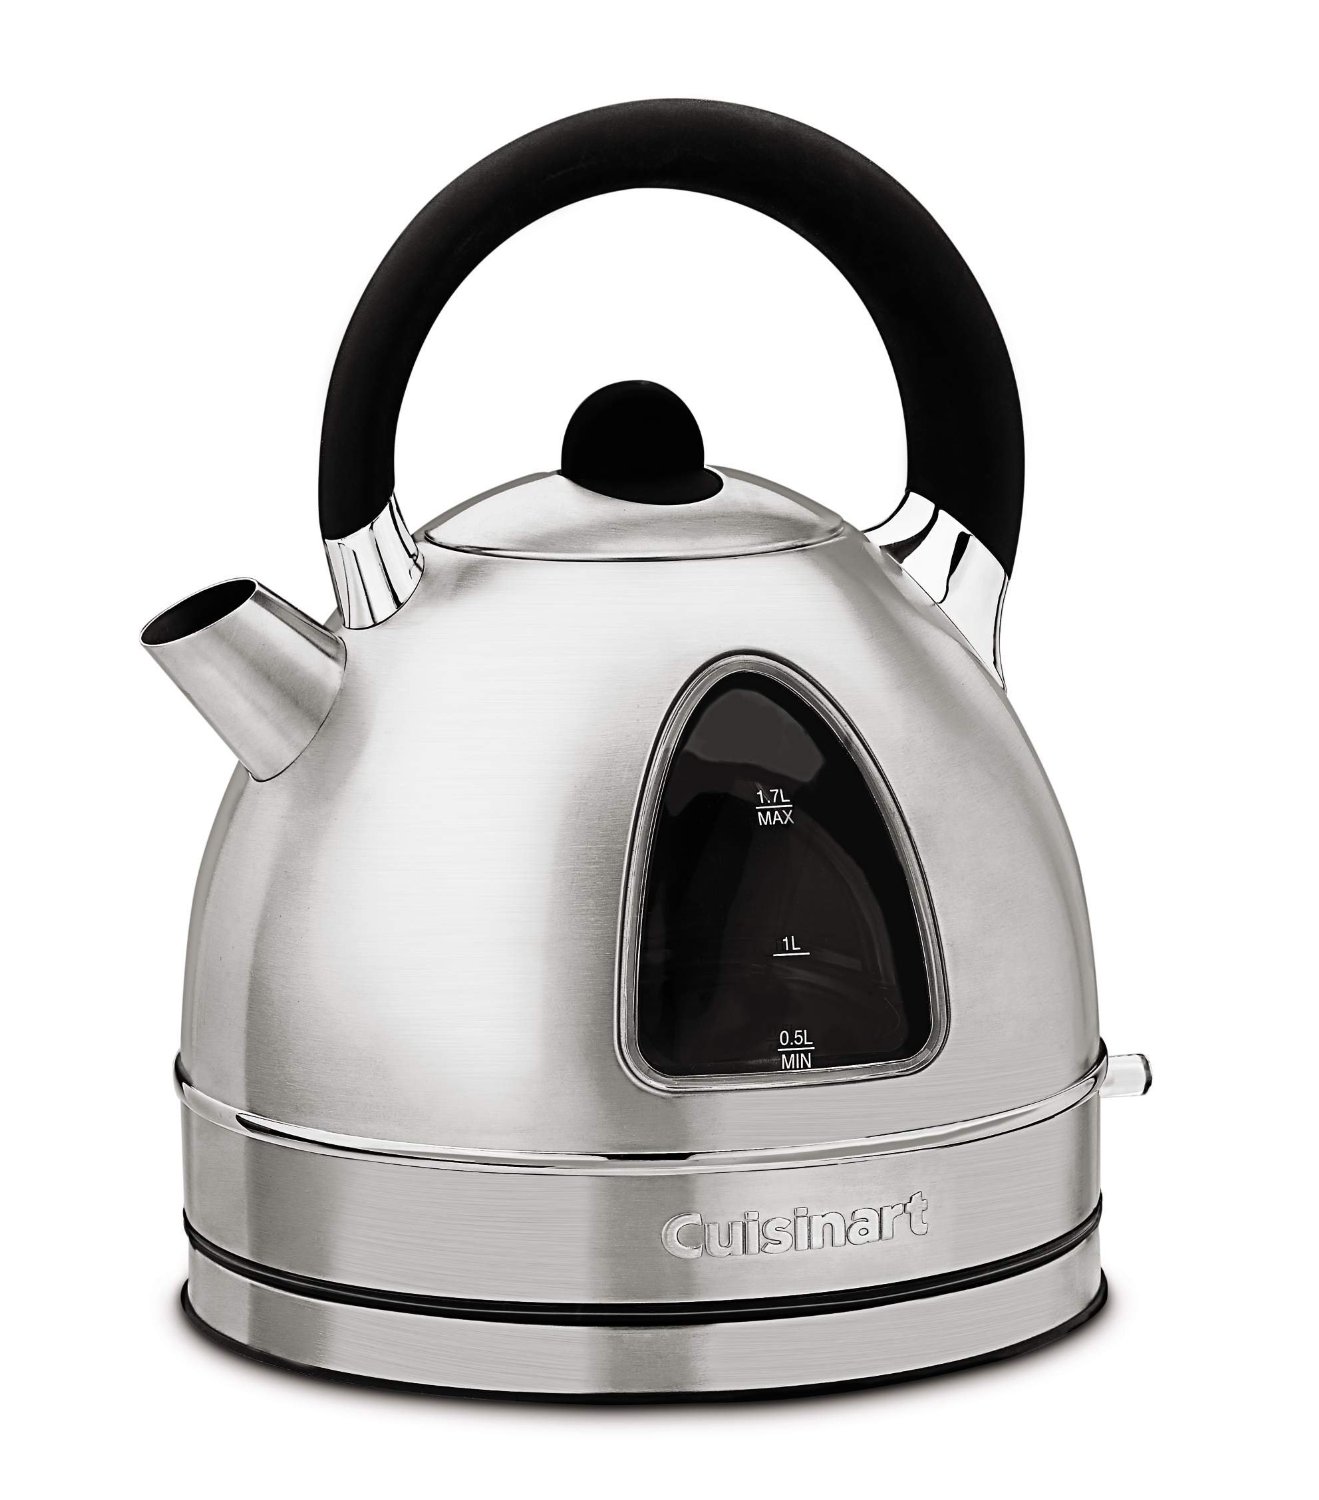 Cuisinart DK-17 Cordless Stainless Steel Electric Kettle